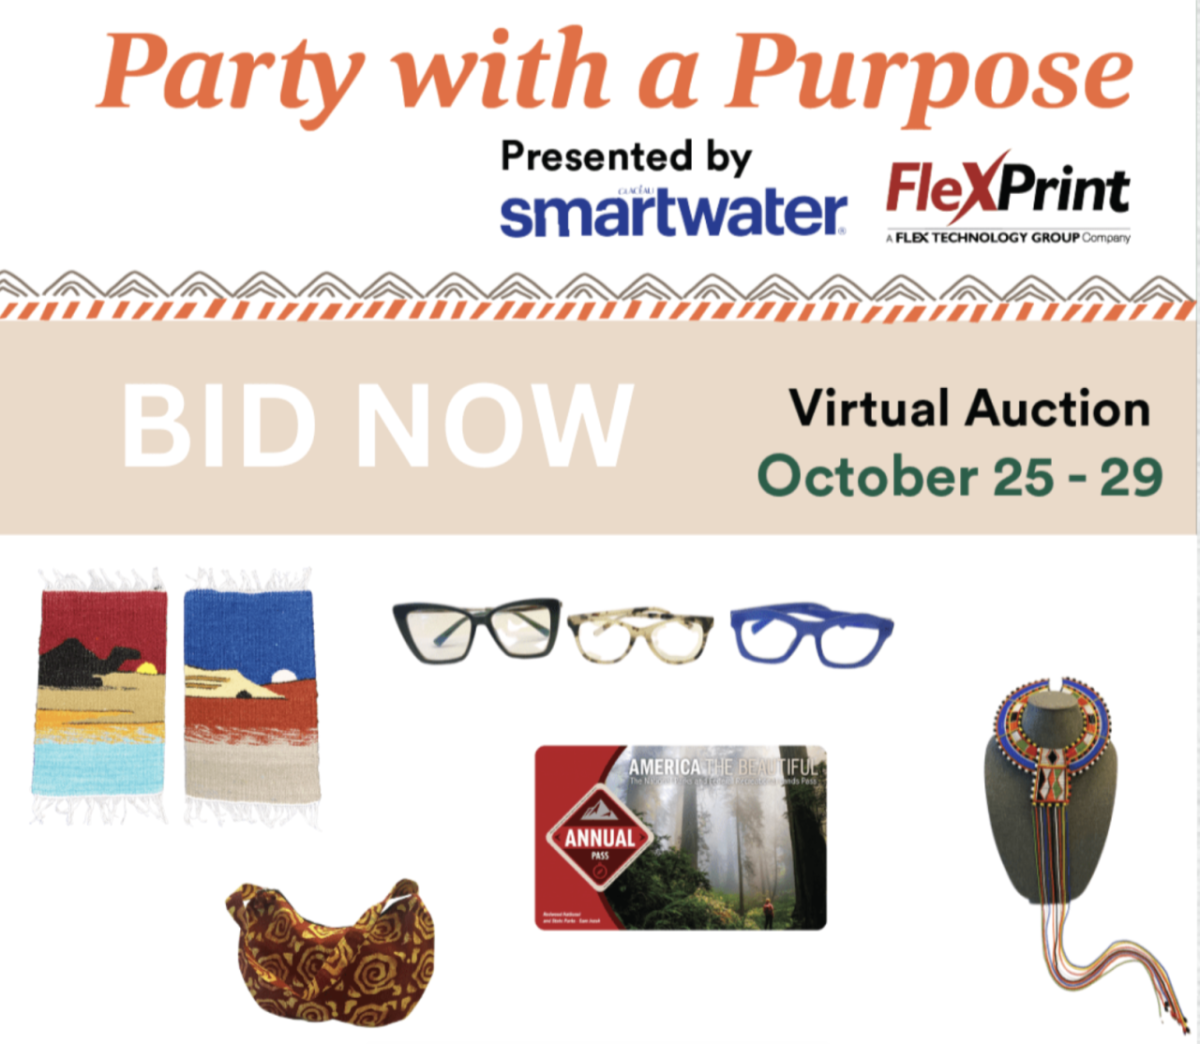 "Party with a Purpose" with logos and images for Virtual Auction on October 25-29